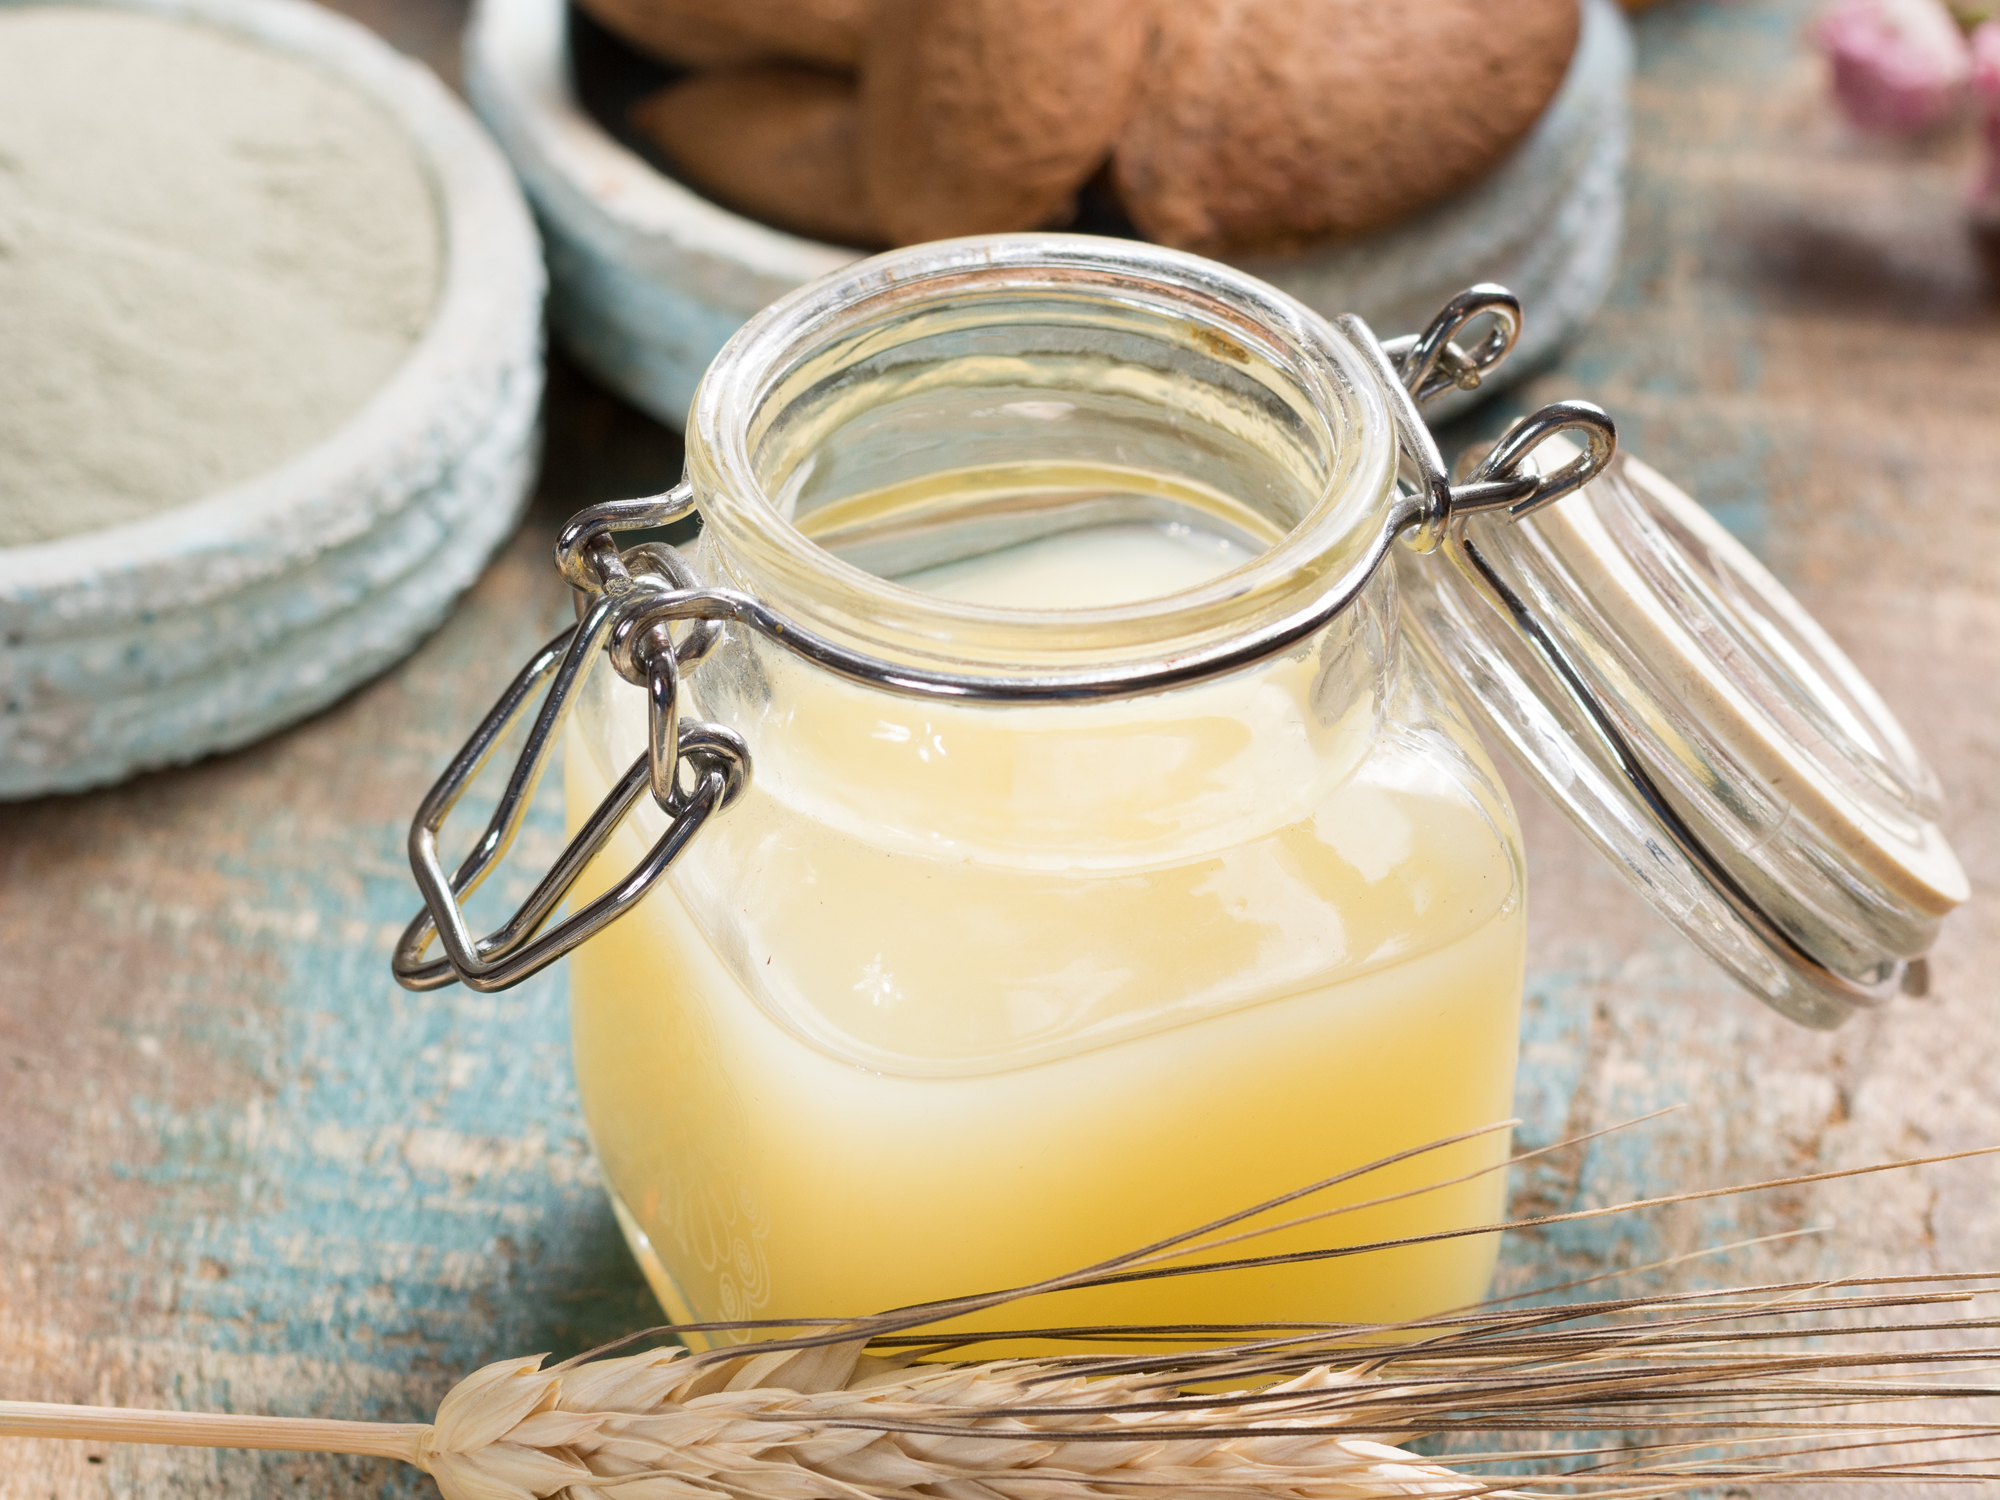 How an ancient salve could help stop antibiotic resistance